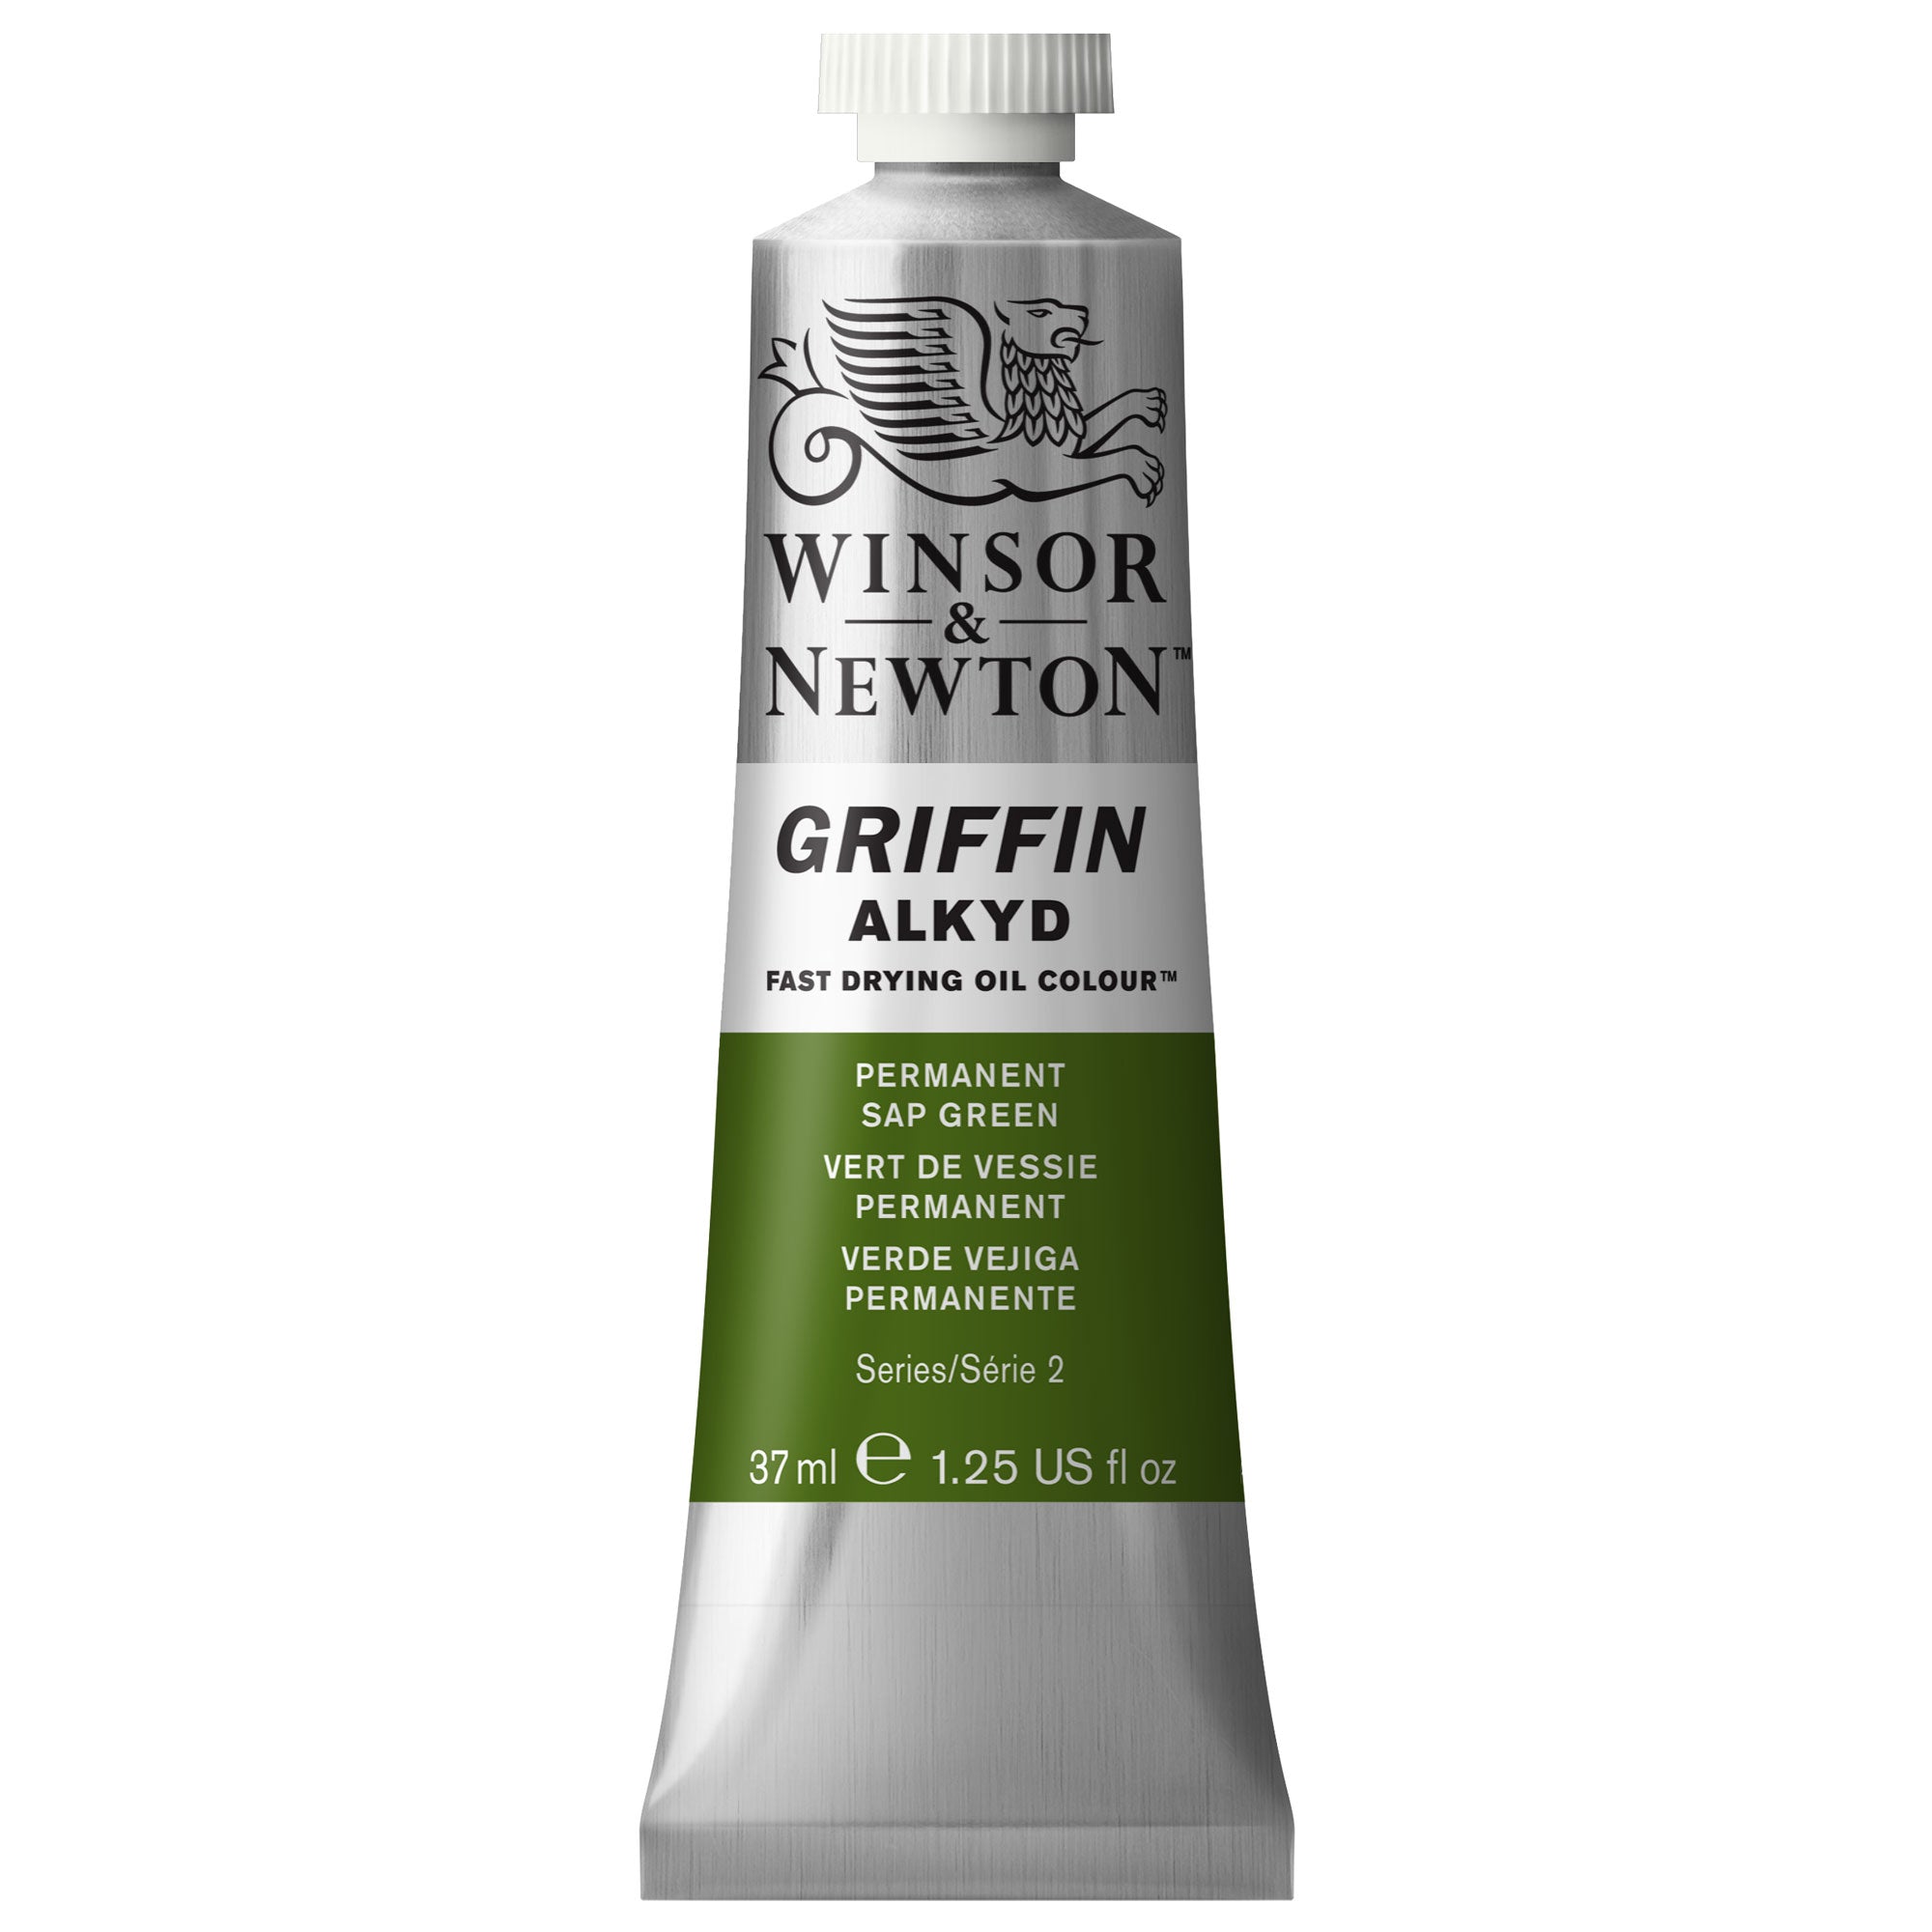 Winsor & Newton Griffin Alkyd Fast Drying Oil Colour 37ml - Series 2